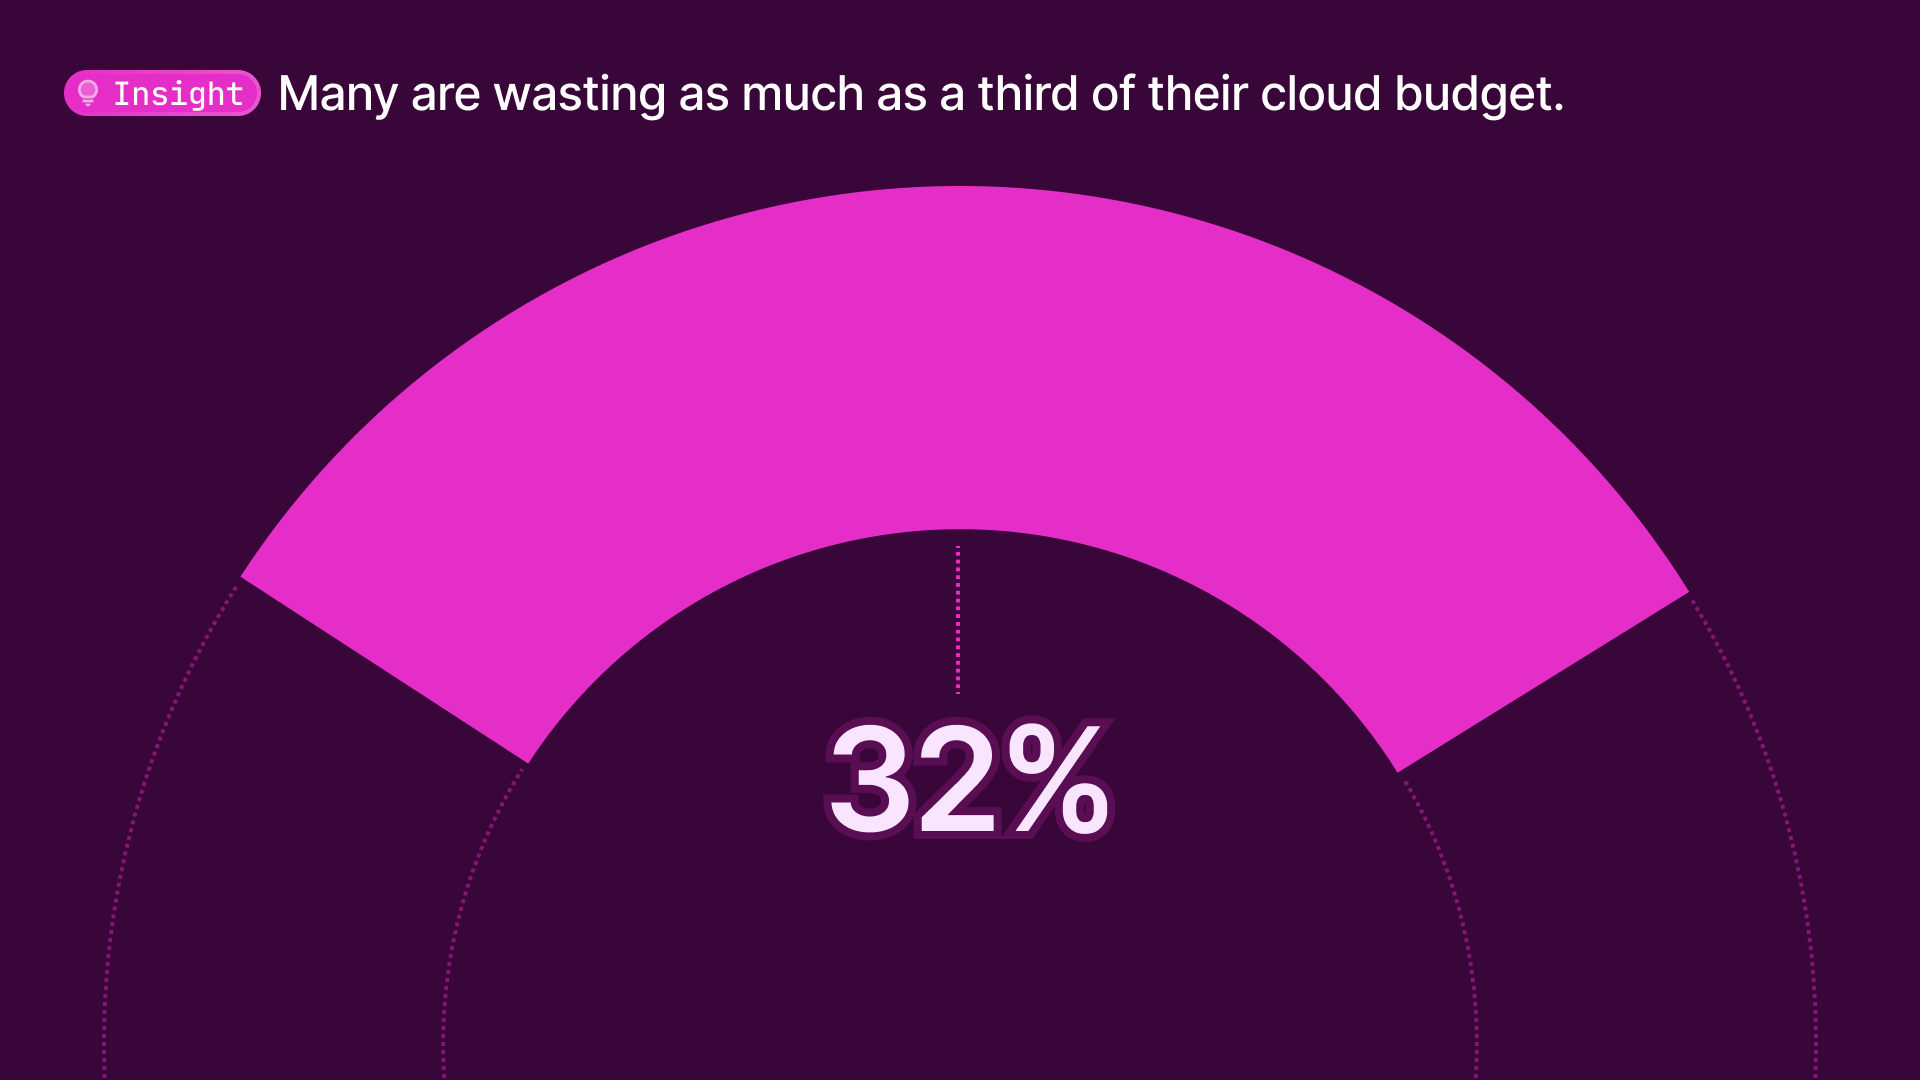 Cloud spend wastage